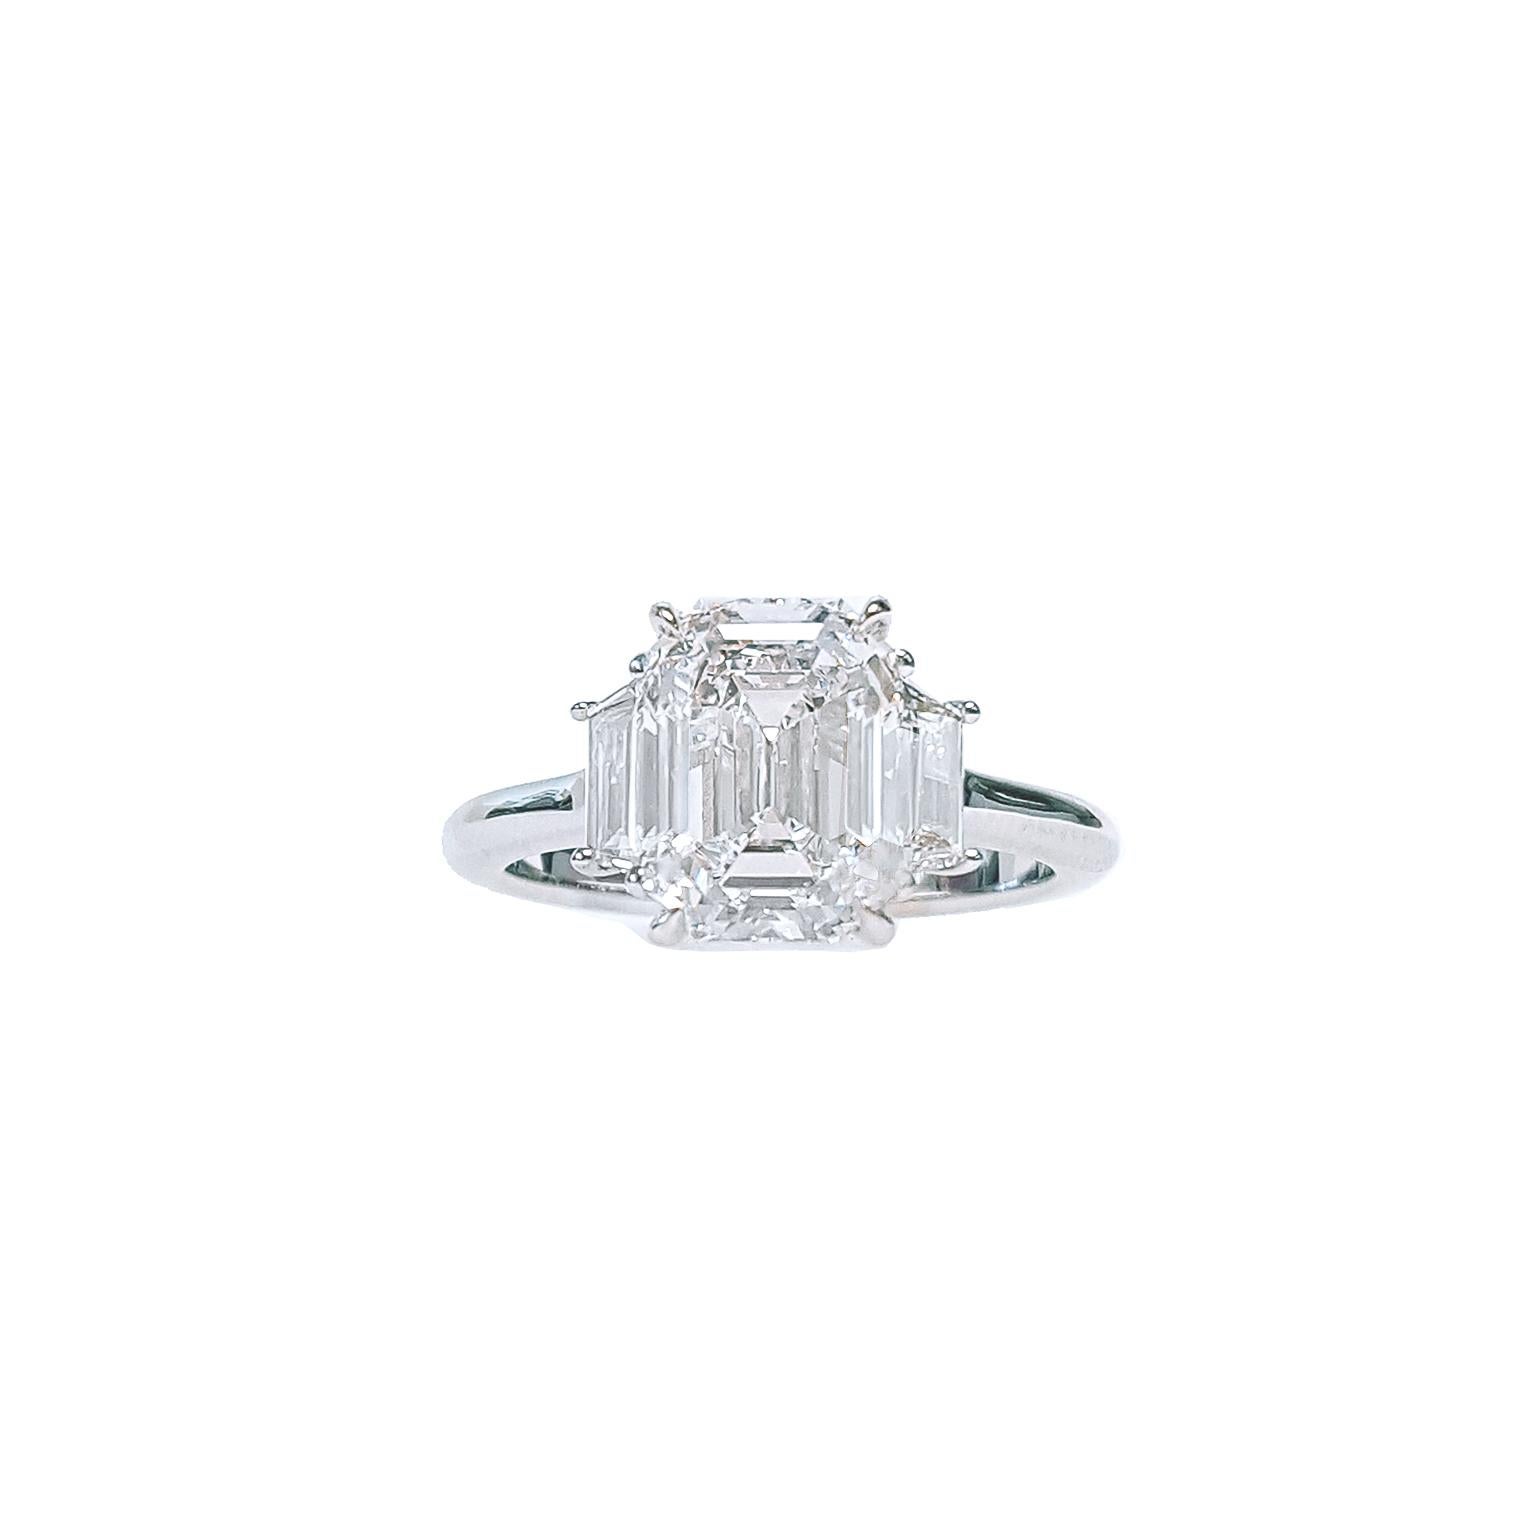 A gorgeous Three-Stone Engagement Ring featuring a 3.02-carat, Emerald-cut diamond GIA certified as D color and VS1 in clarity. The center diamond is elegantly accompanied by two Trapezoid-cut diamonds with a combined weight of 0.46 carats, VVS in